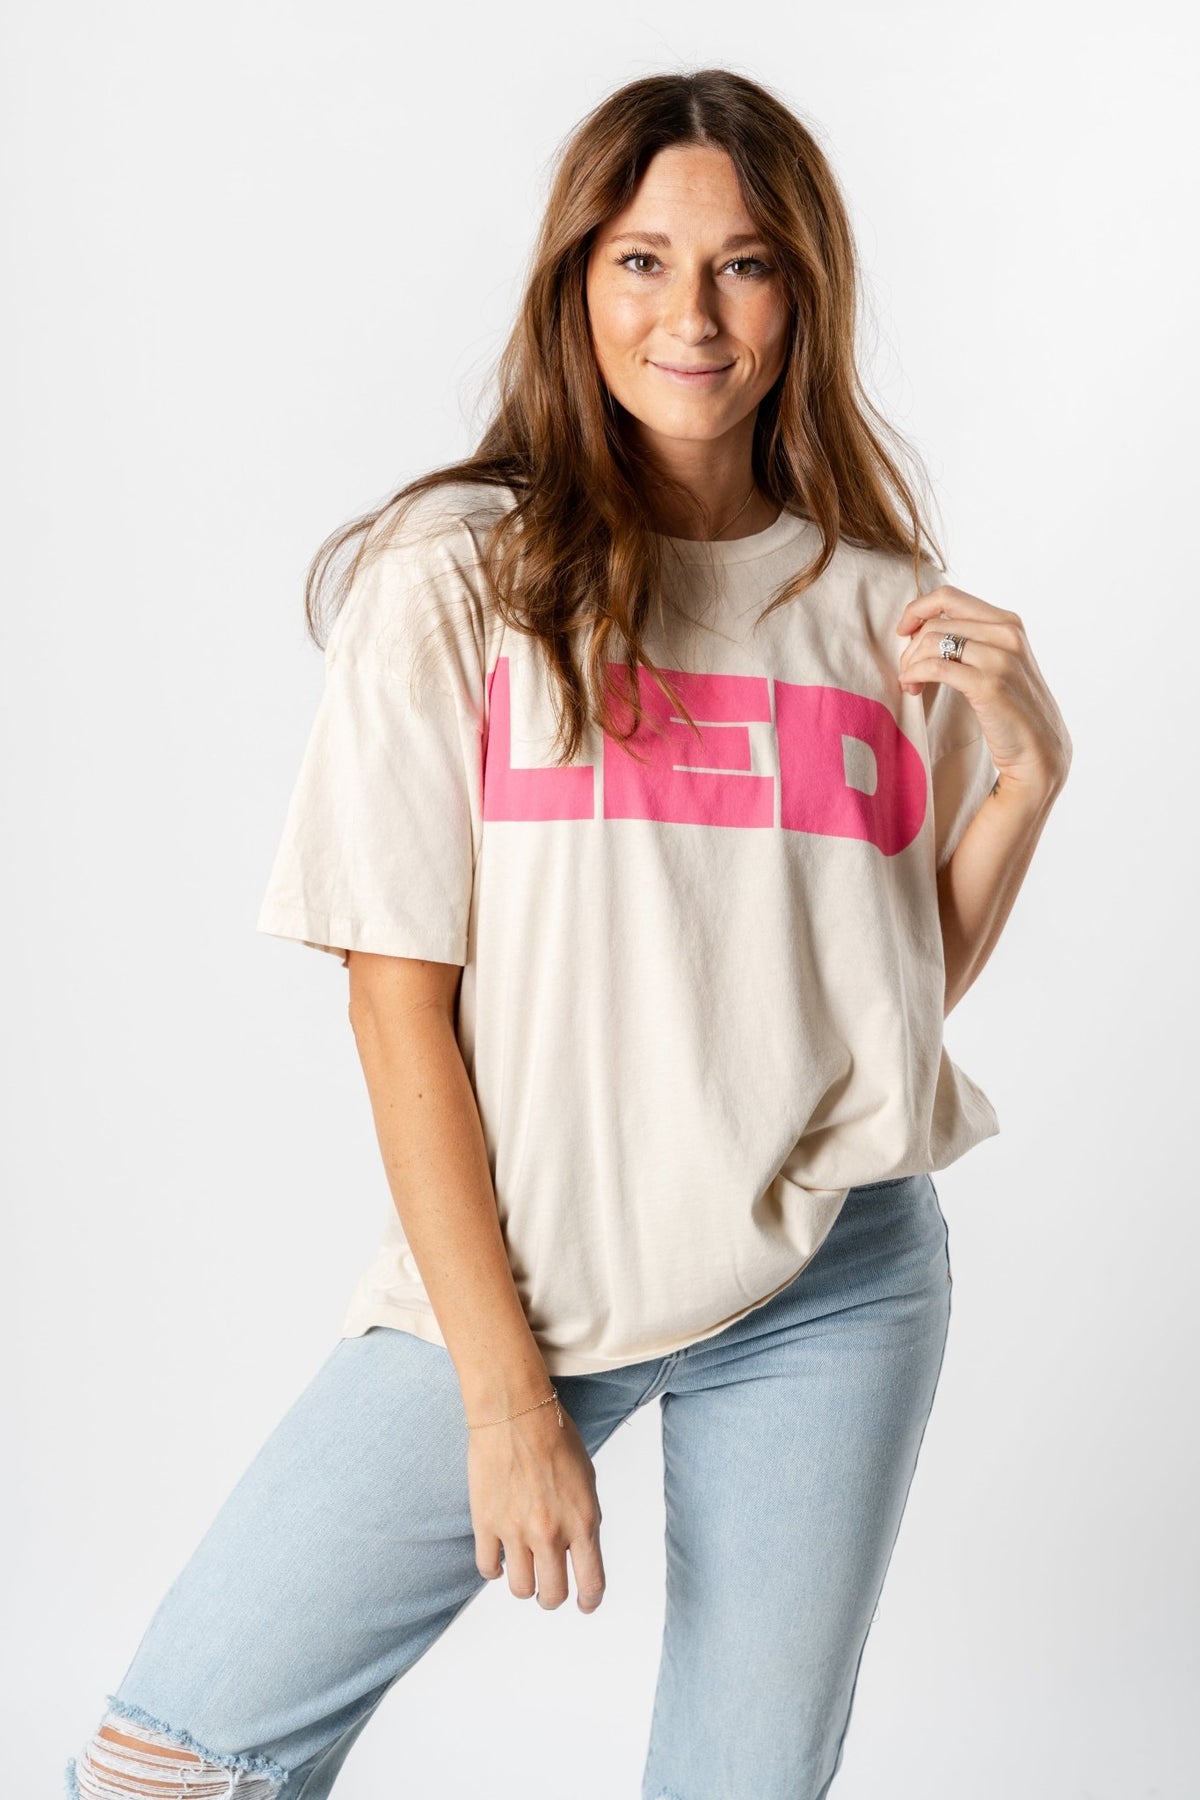 DayDreamer Led Zeppelin merch oversized tee dirty white - Trendy Band T-Shirts and Sweatshirts at Lush Fashion Lounge Boutique in Oklahoma City